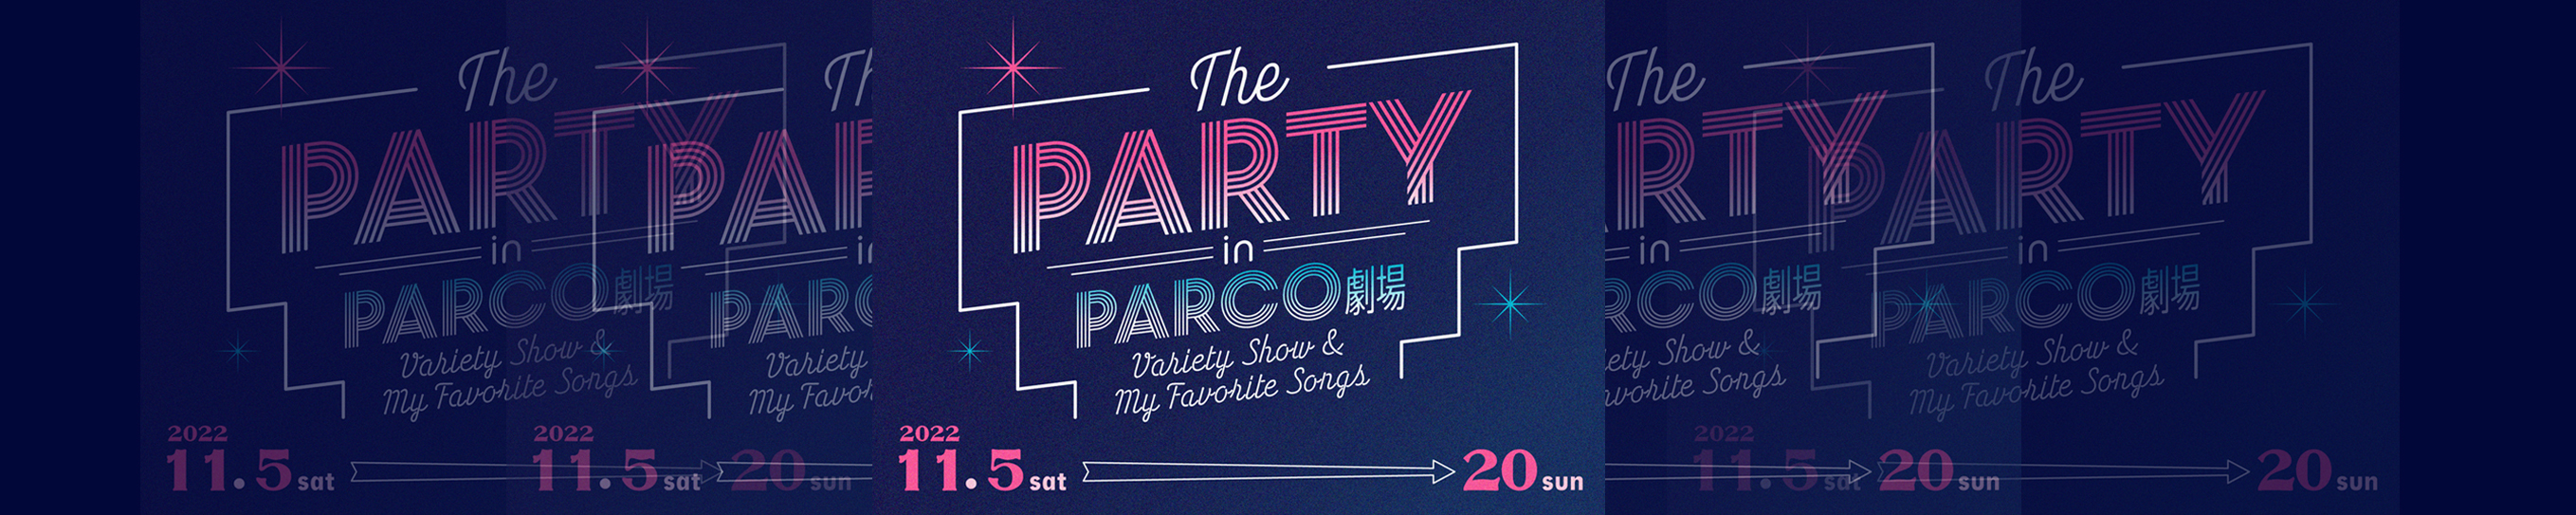 2022THE PARTY in PARCO劇場バナー